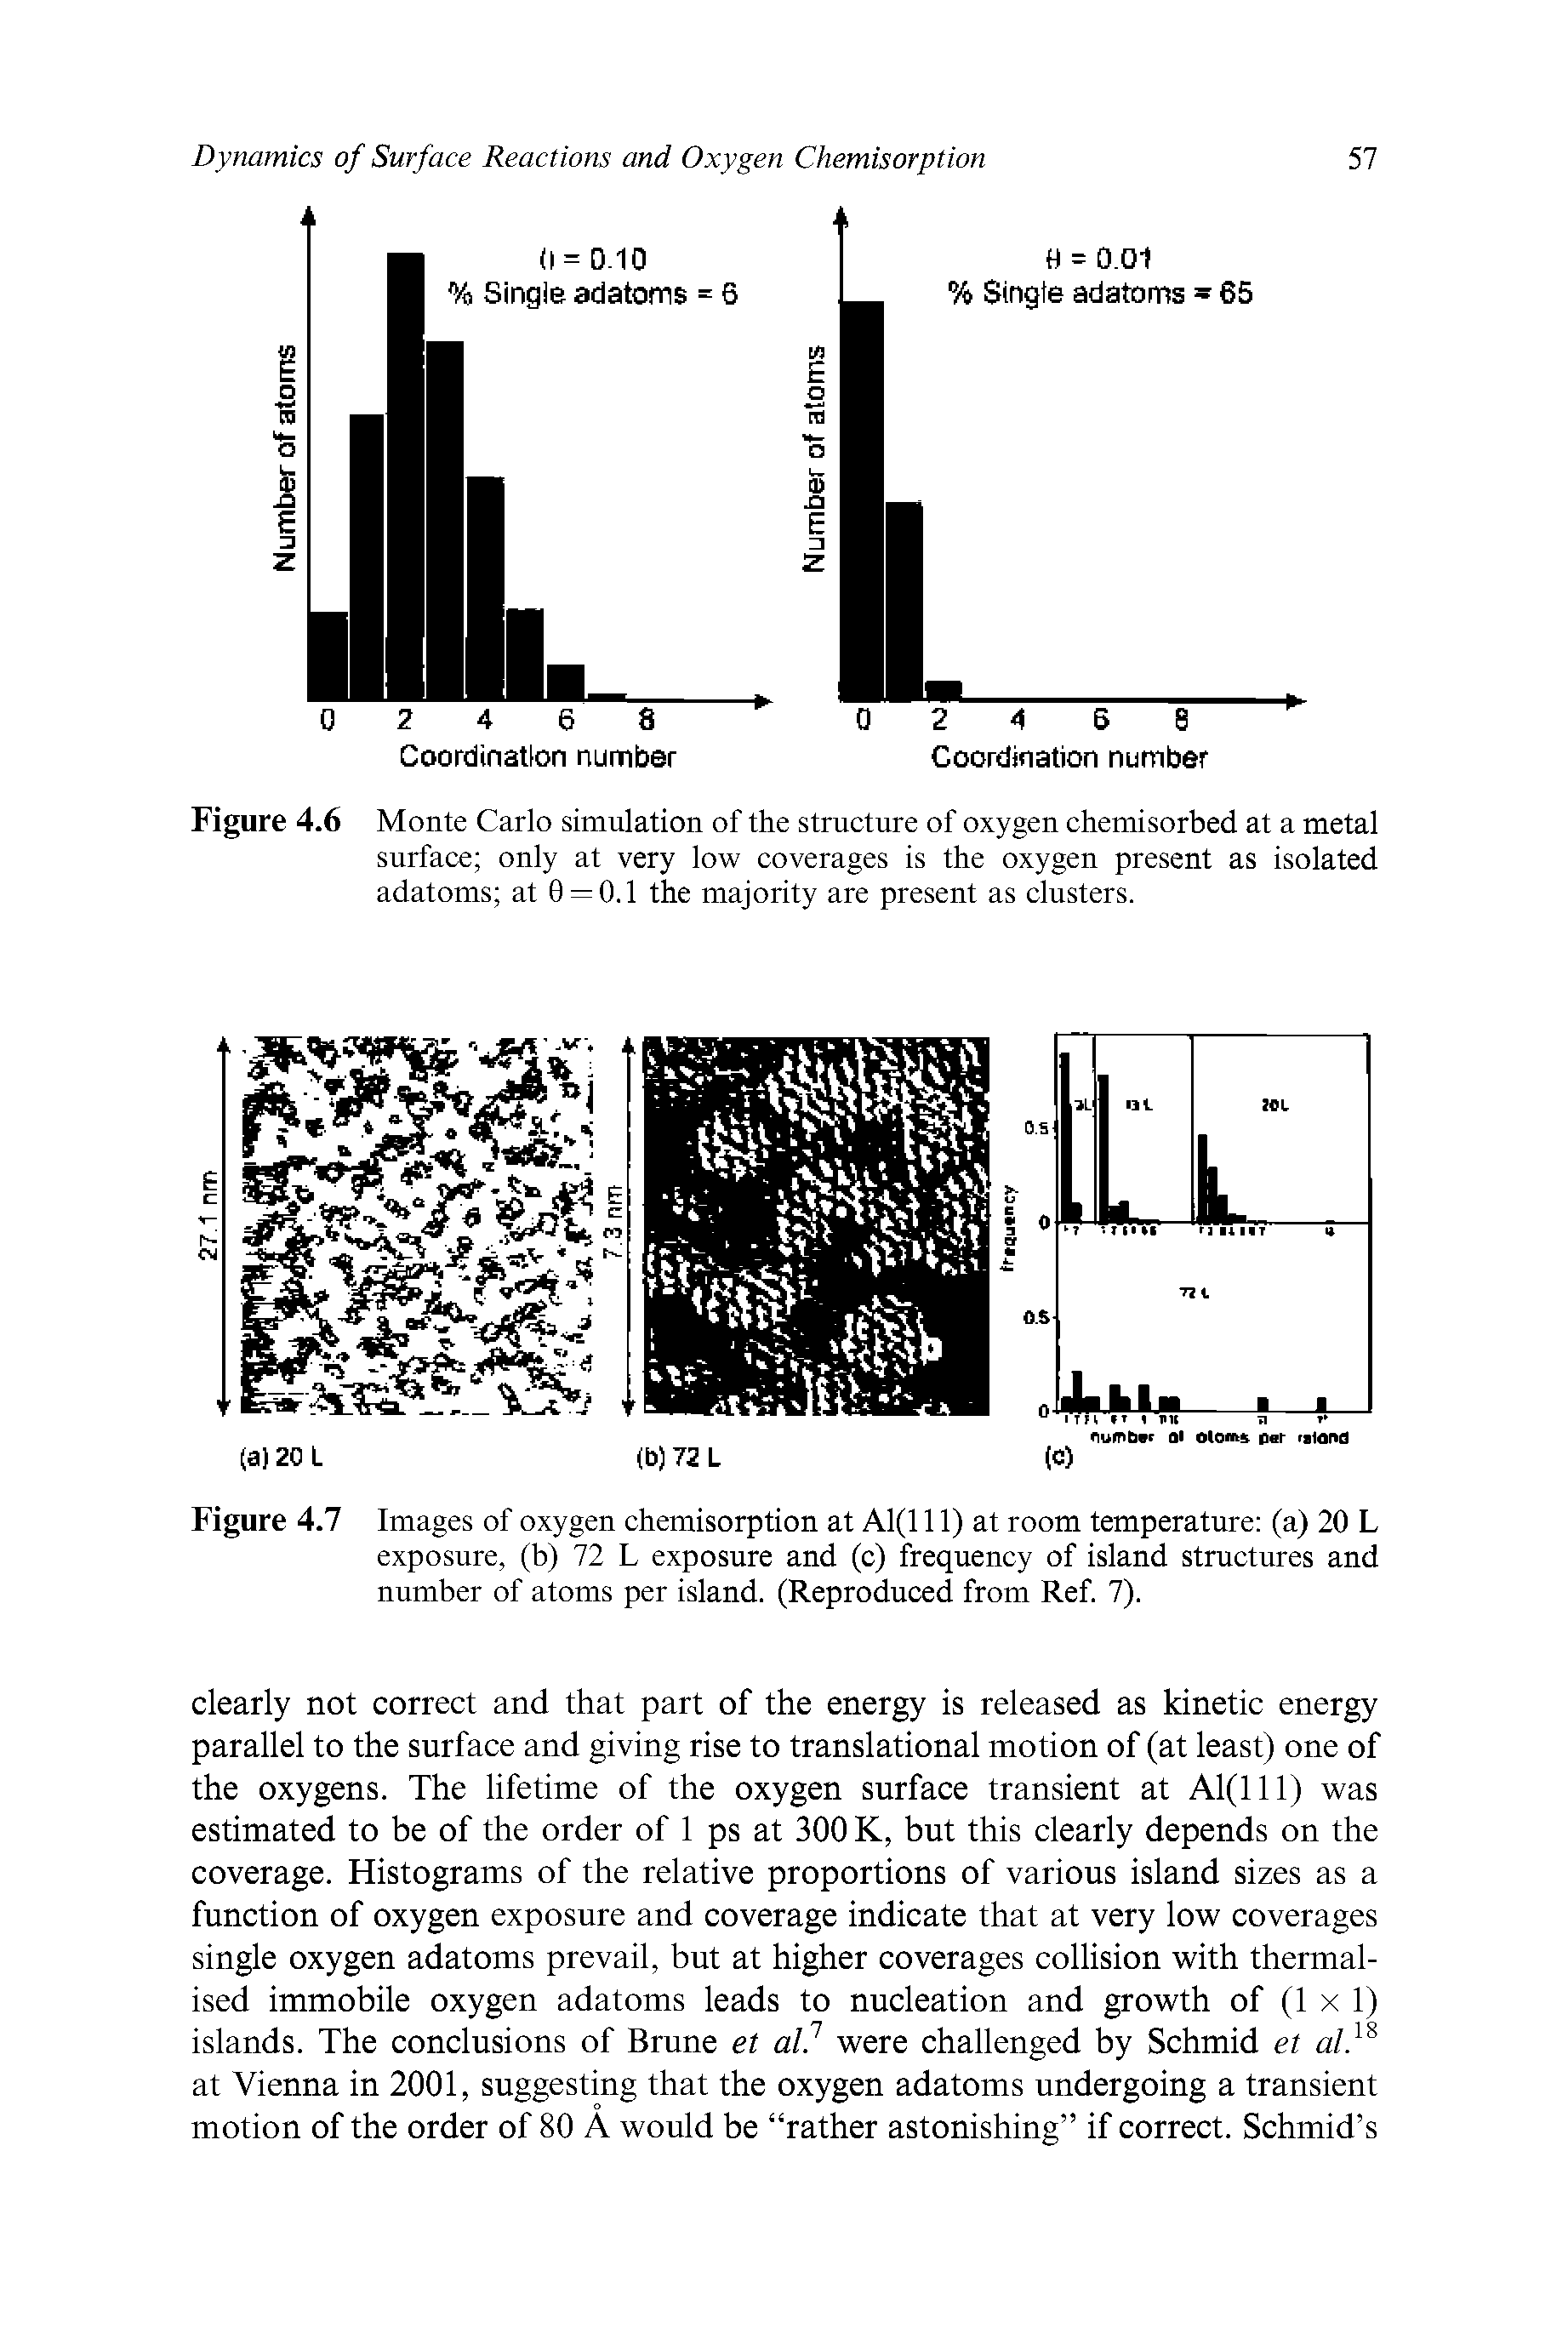 Figure 4.7 Images of oxygen chemisorption at Al(l 11) at room temperature (a) 20 L exposure, (b) 72 L exposure and (c) frequency of island structures and number of atoms per island. (Reproduced from Ref. 7).